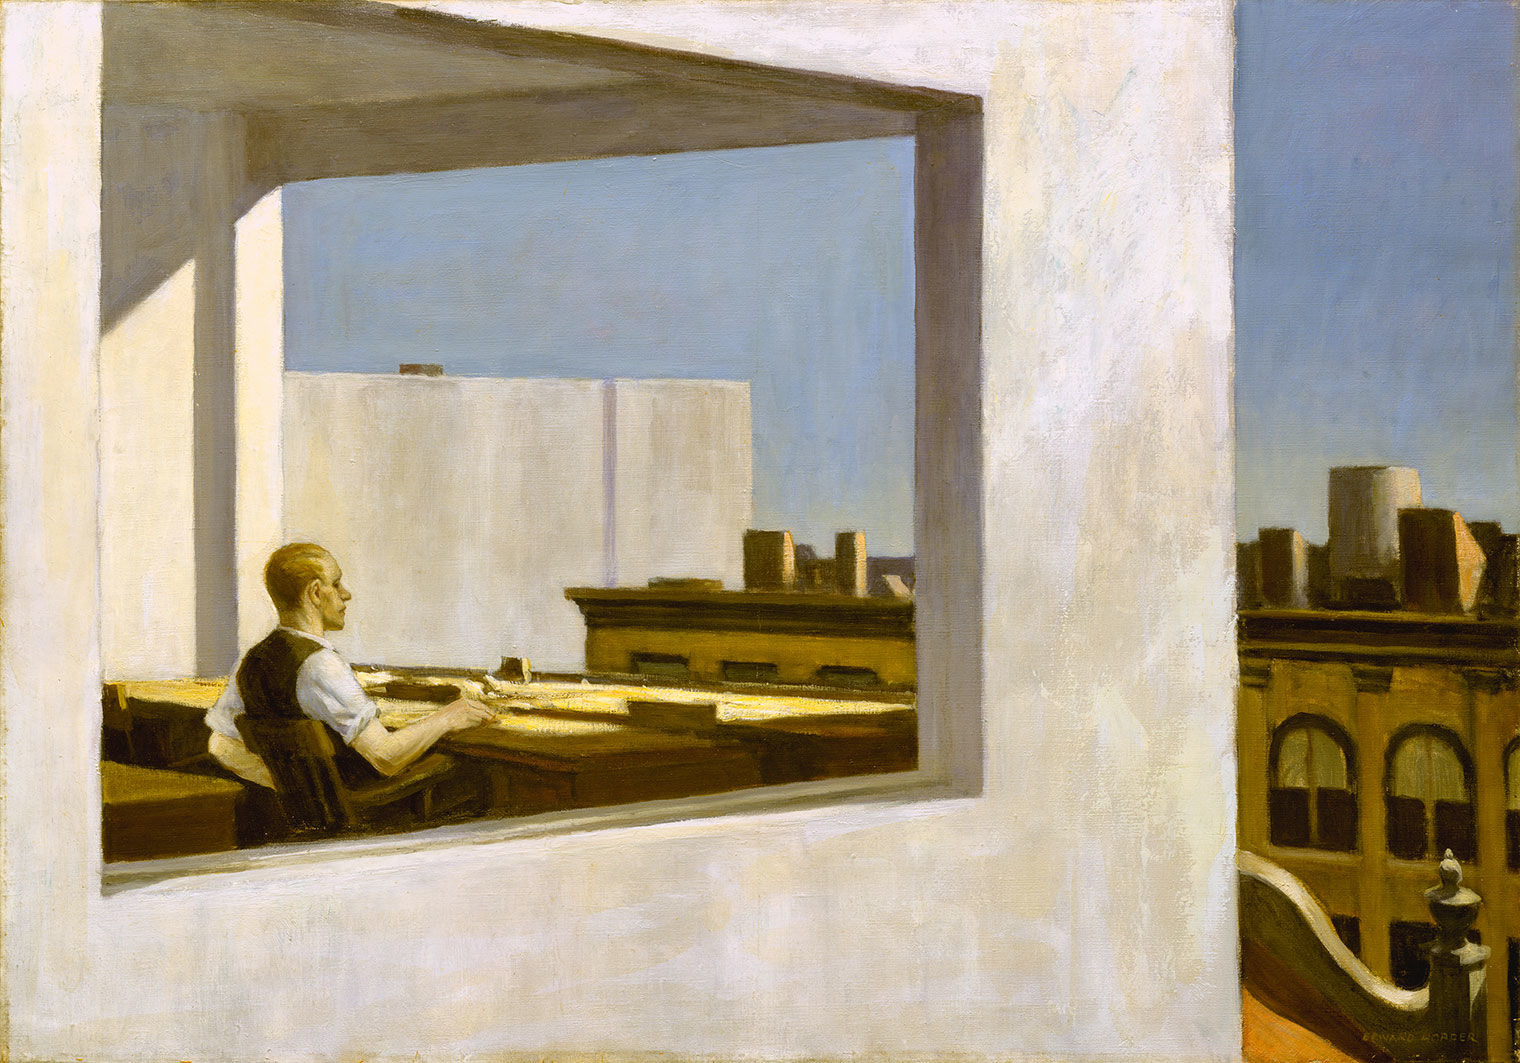 A painting of a man seen through the window of an office building